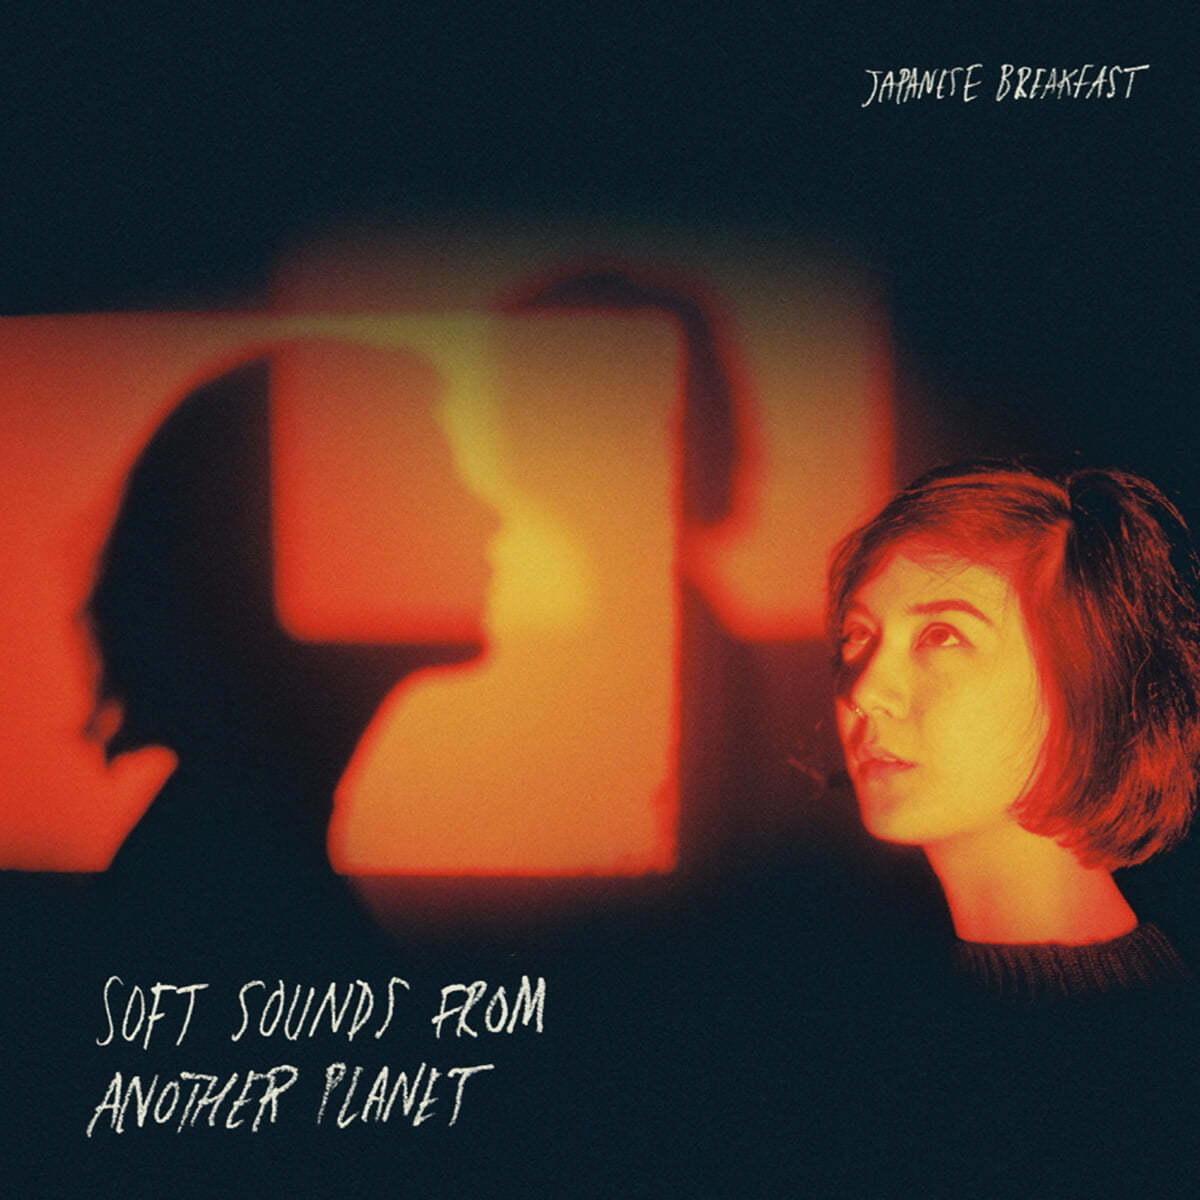 Japanese Breakfast (재패니즈 브렉퍼스트) - Soft Sounds from Another Planet [터콰이즈 컬러 LP]